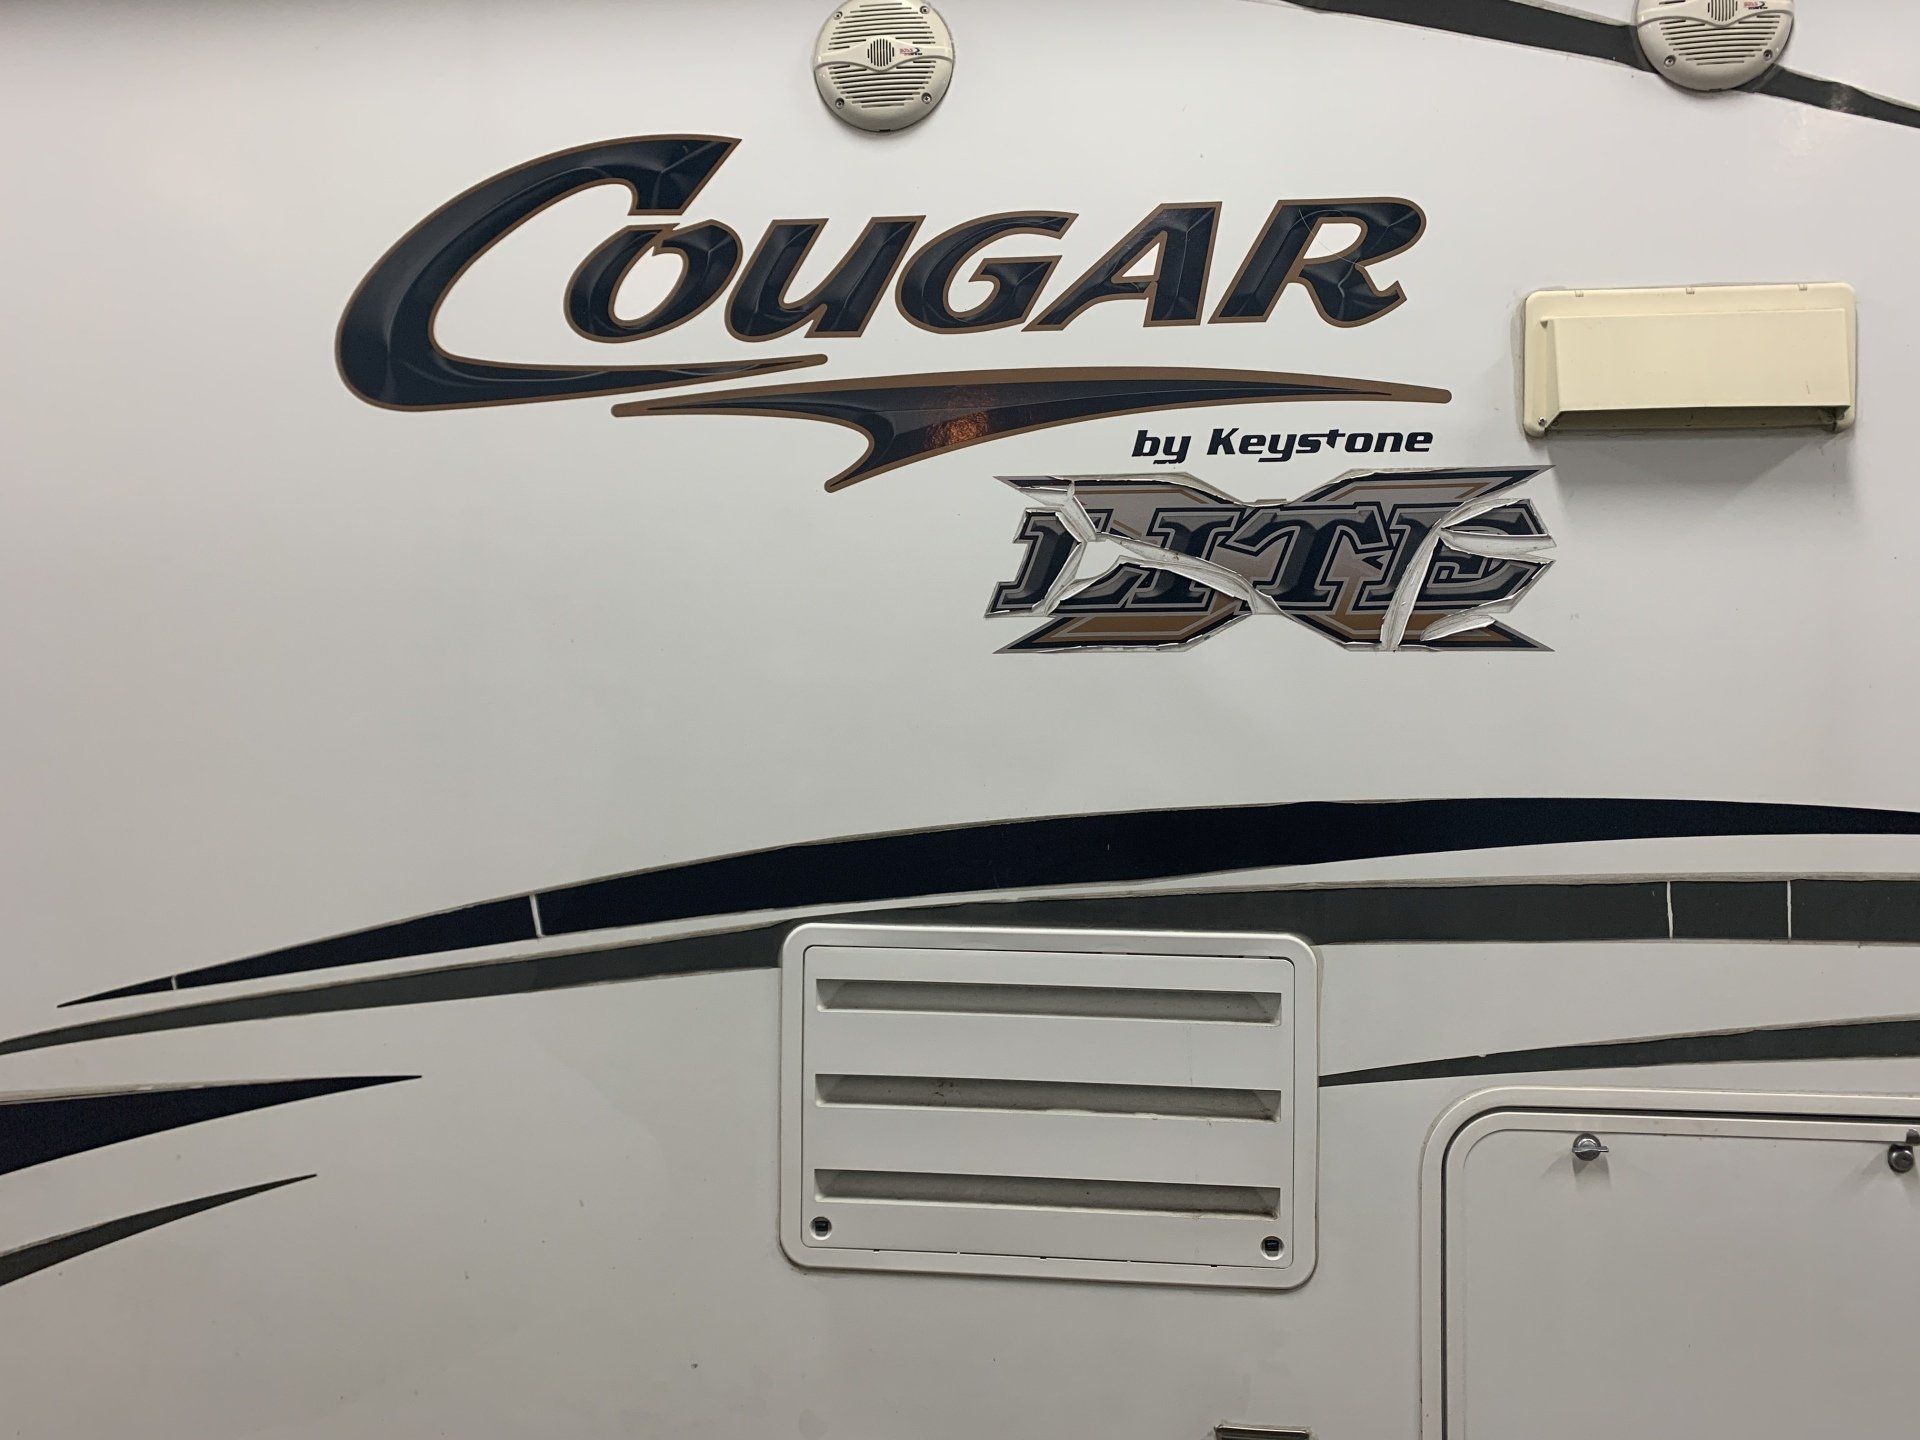 2020 - Alberta's Worst RV Decal Contest - Grand Prize Winner - Before & After - Pic 15